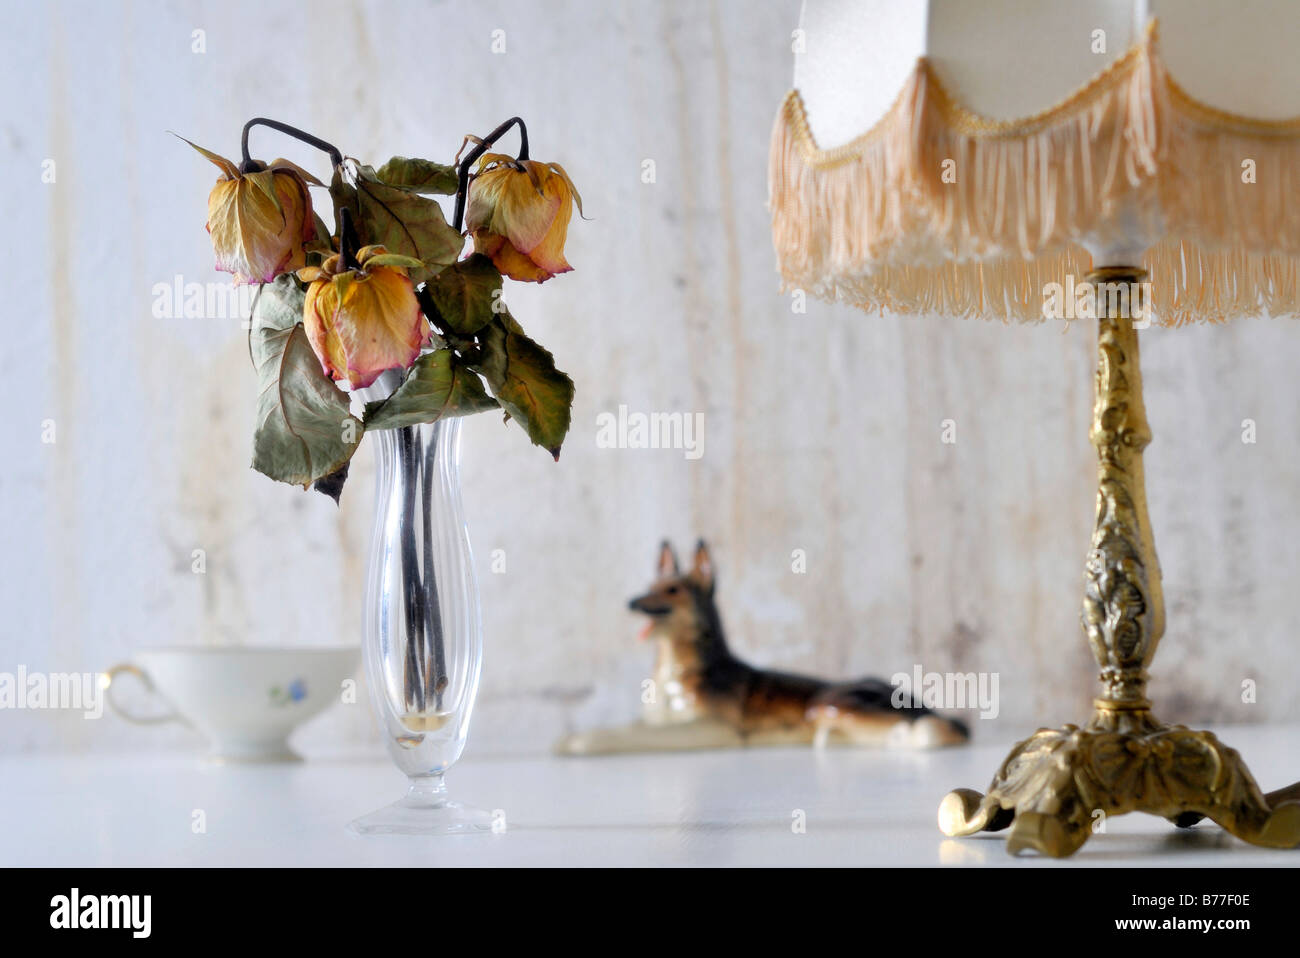 Dried-out roses in a retirement home, symbolic image age-related poverty Stock Photo